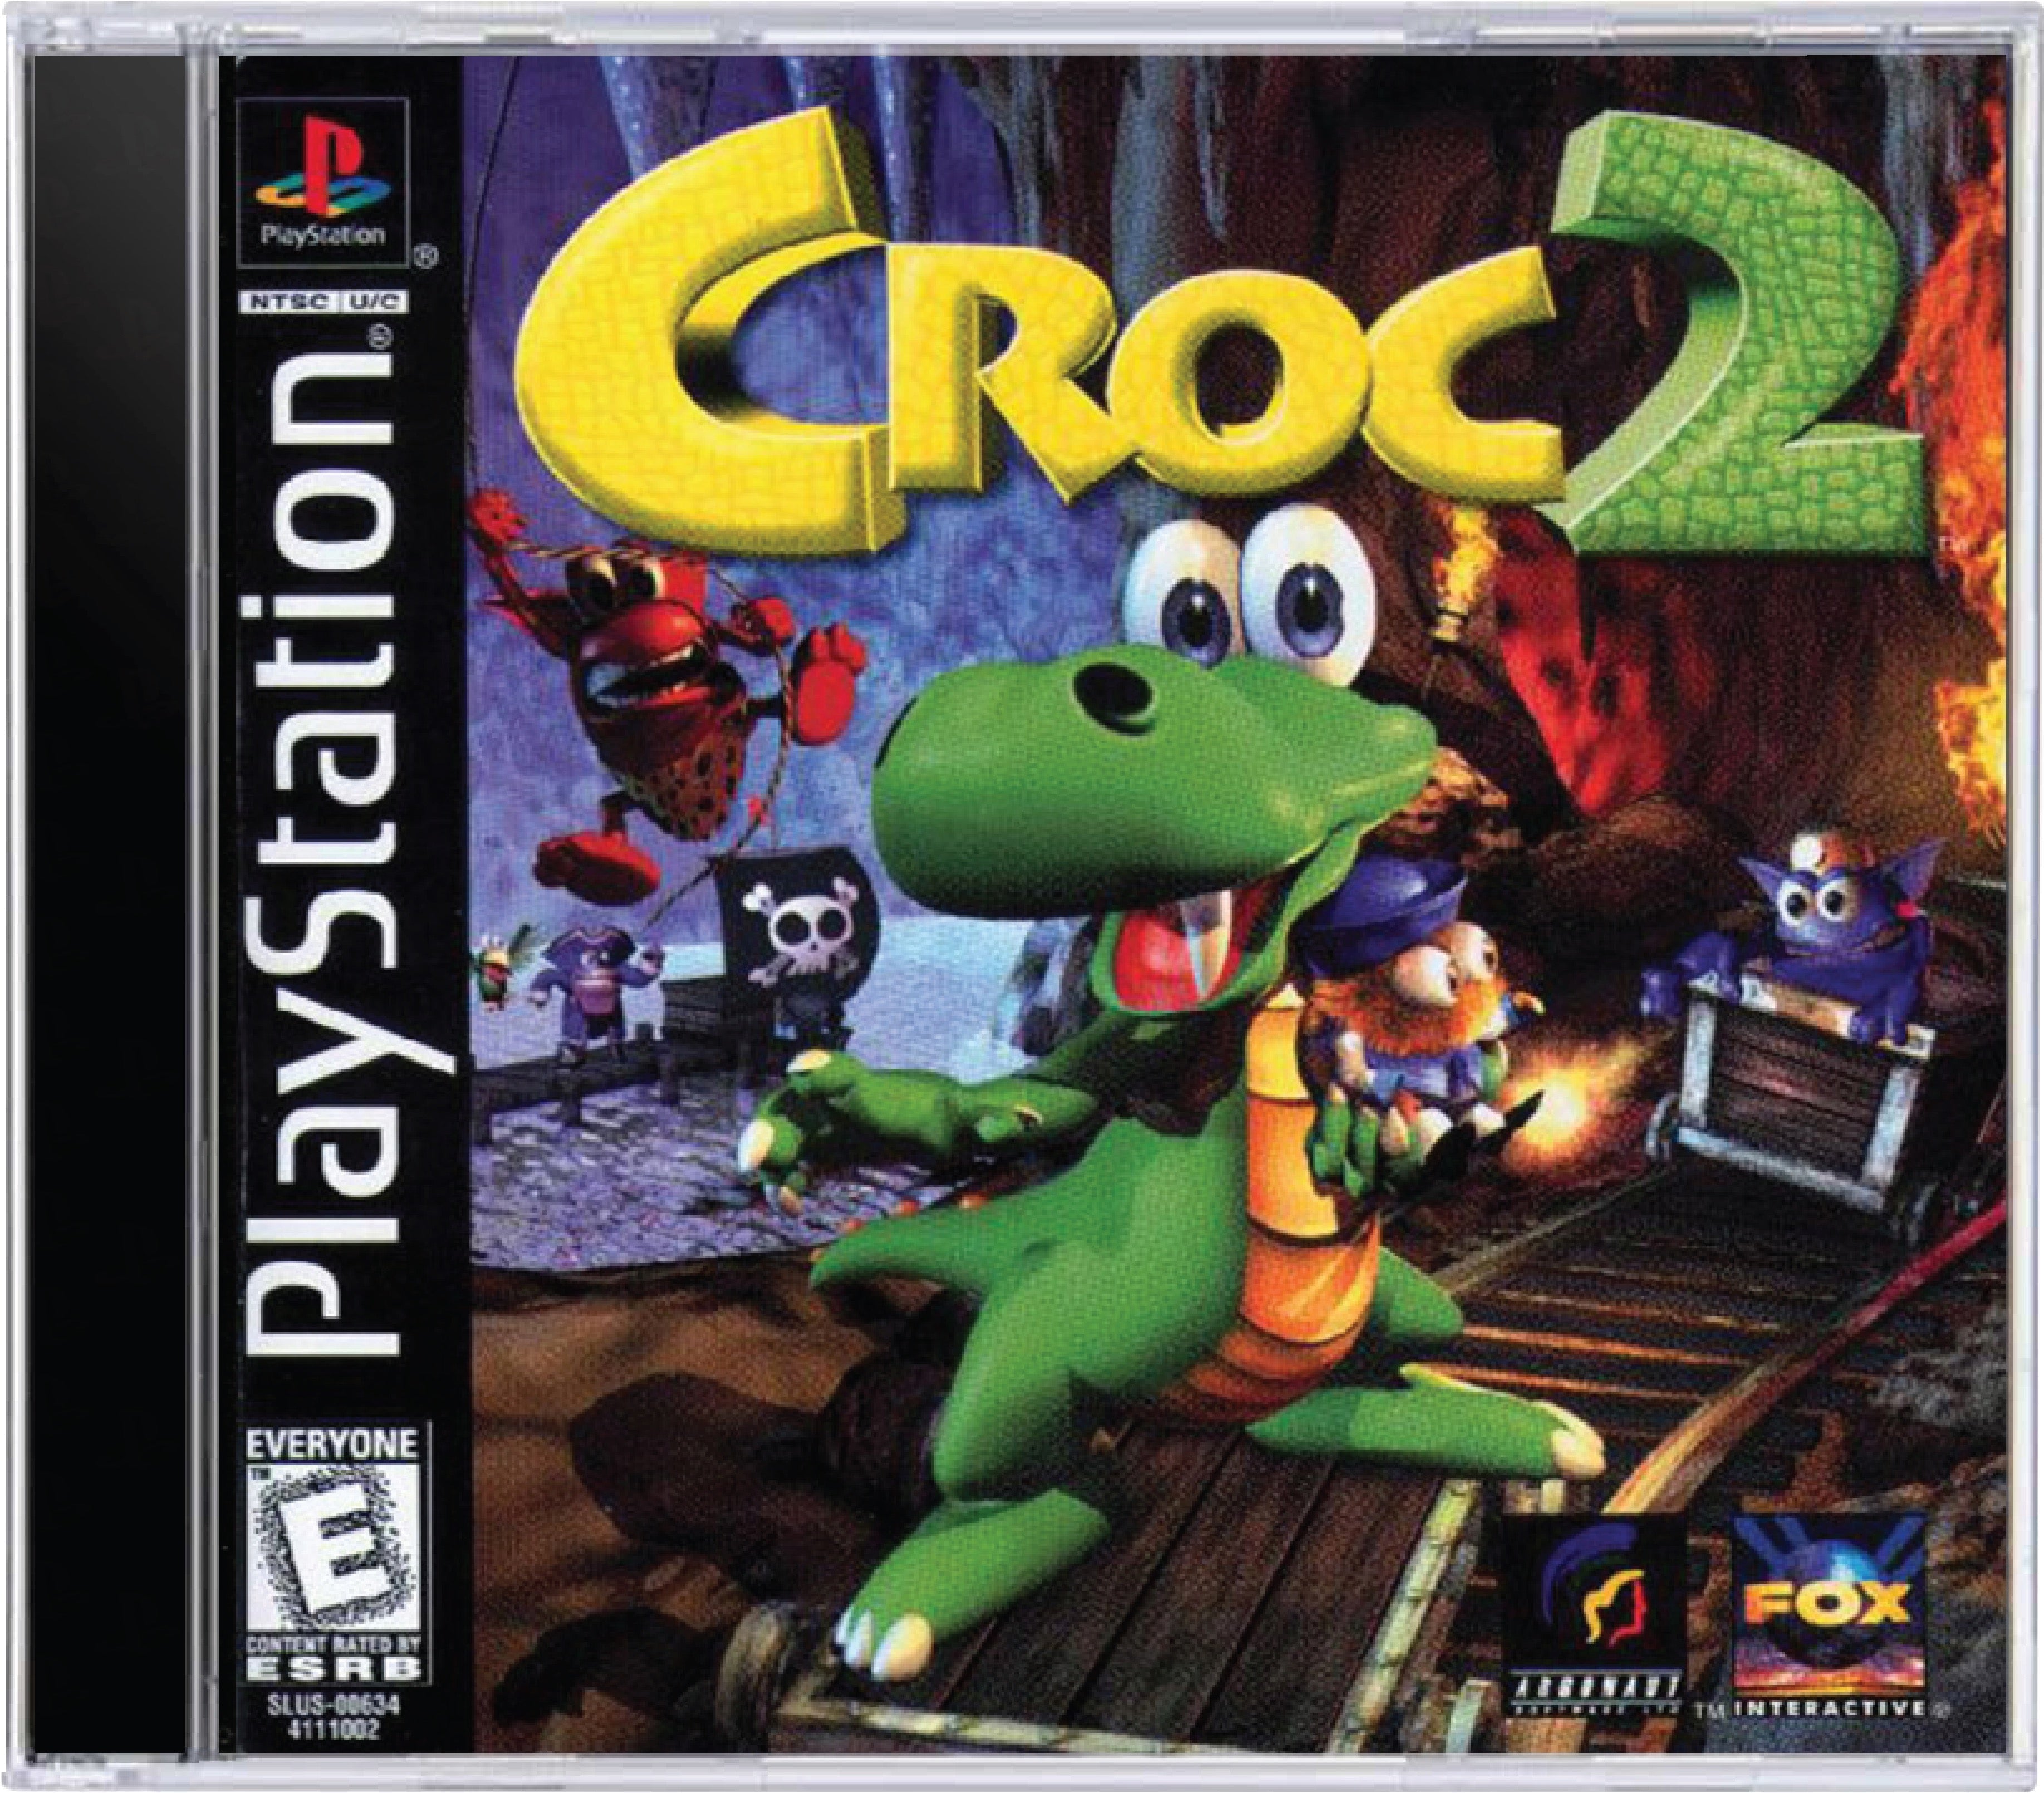 Croc 2 Cover Art and Product Photo